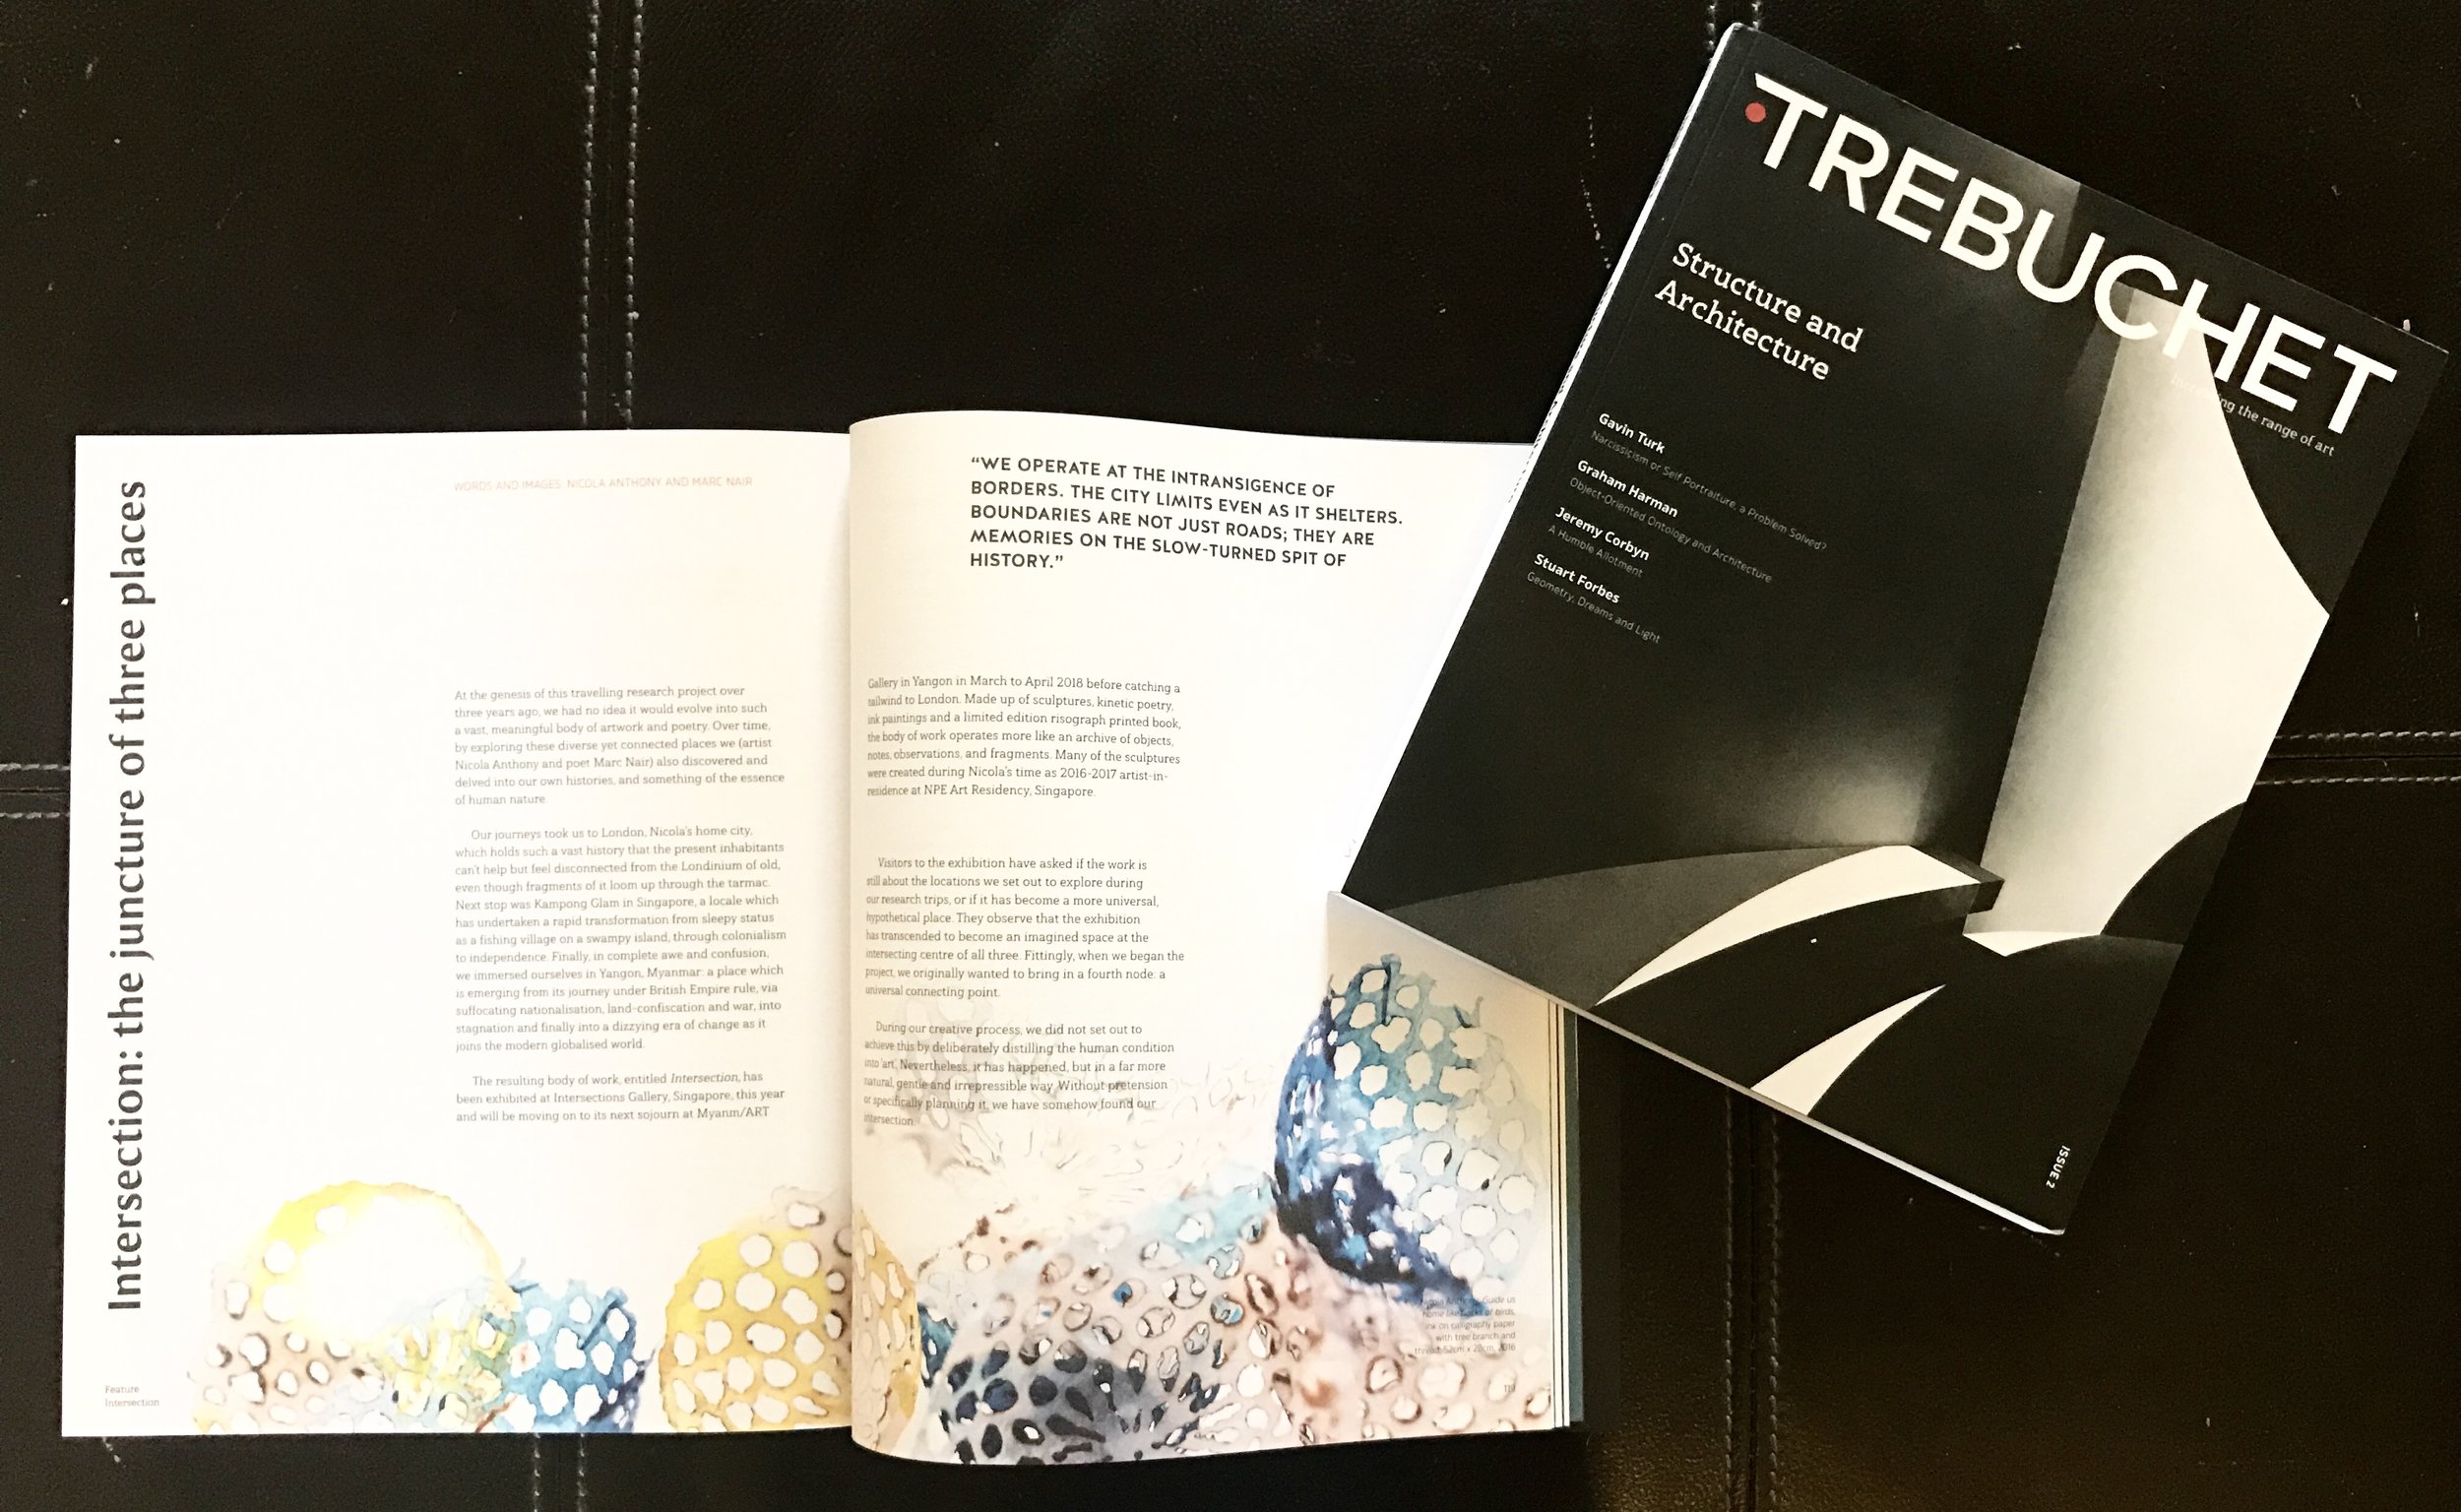 Trebuchet (Issue 2), Words and images by Nicola Anthony and Marc Nair, September 2017